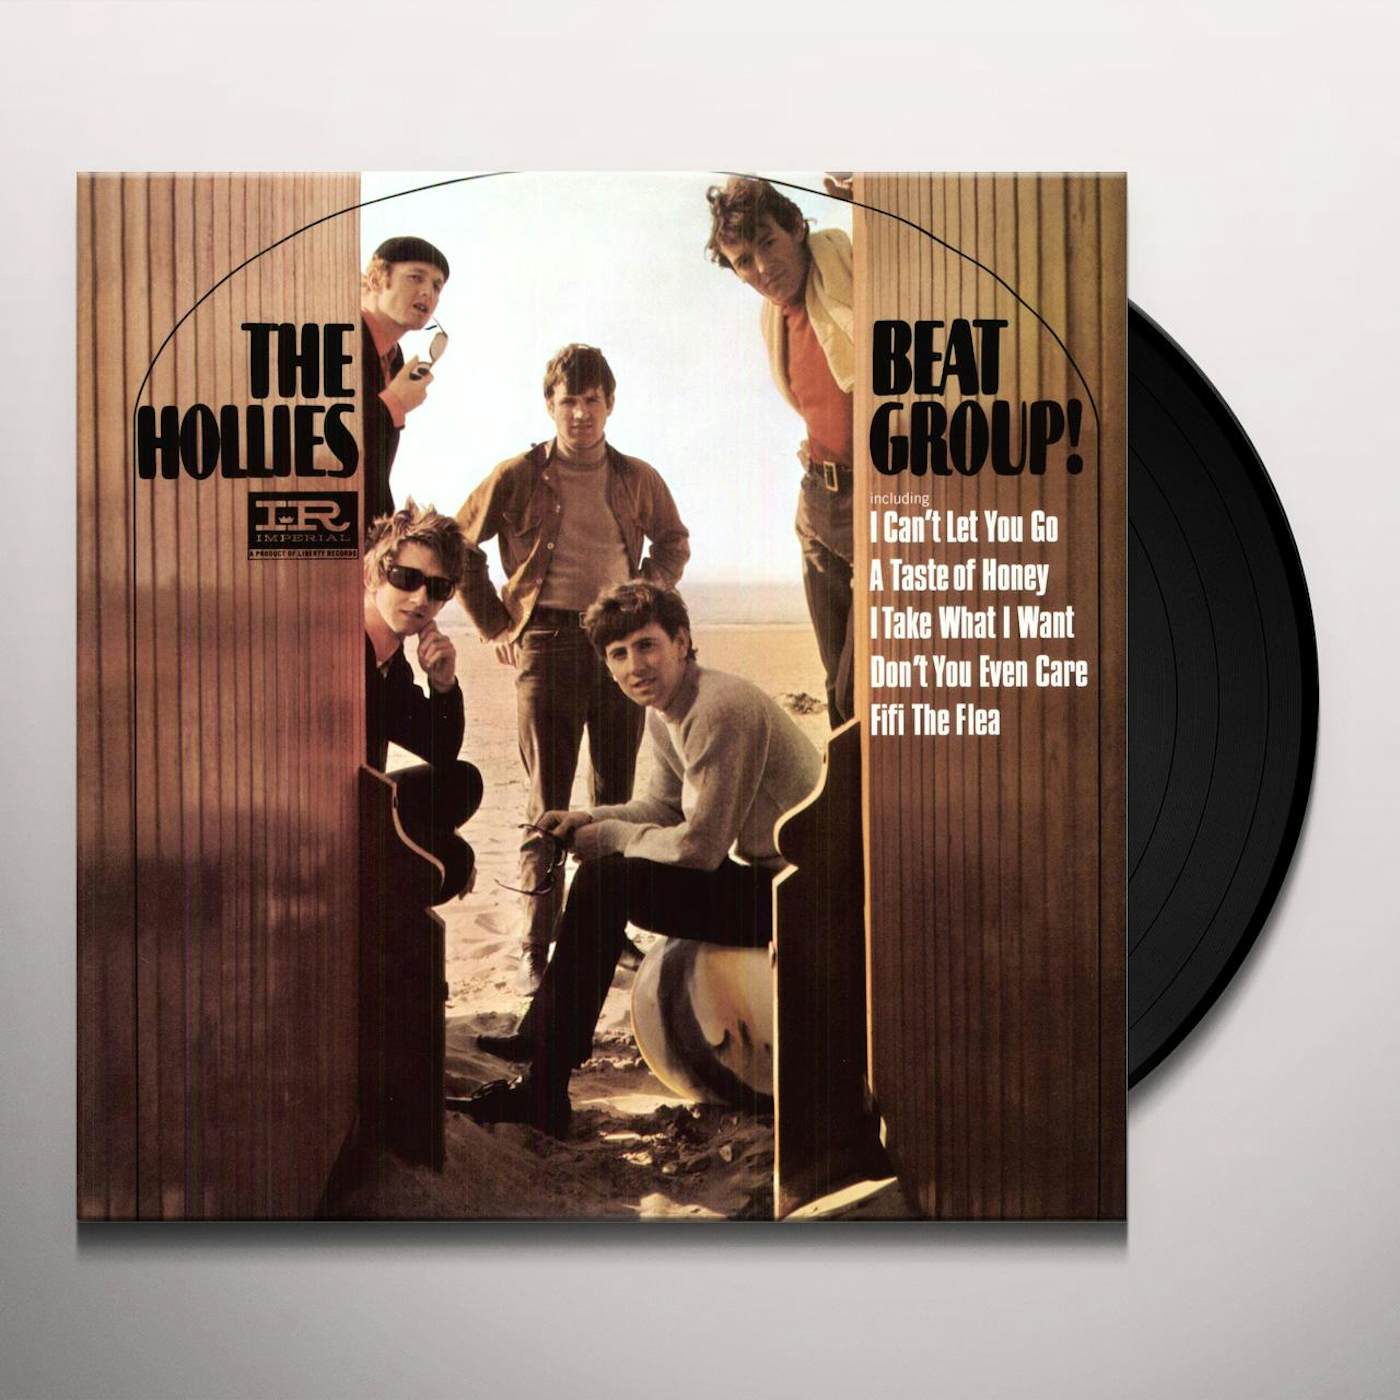 The Hollies BEAT GROUP Vinyl Record